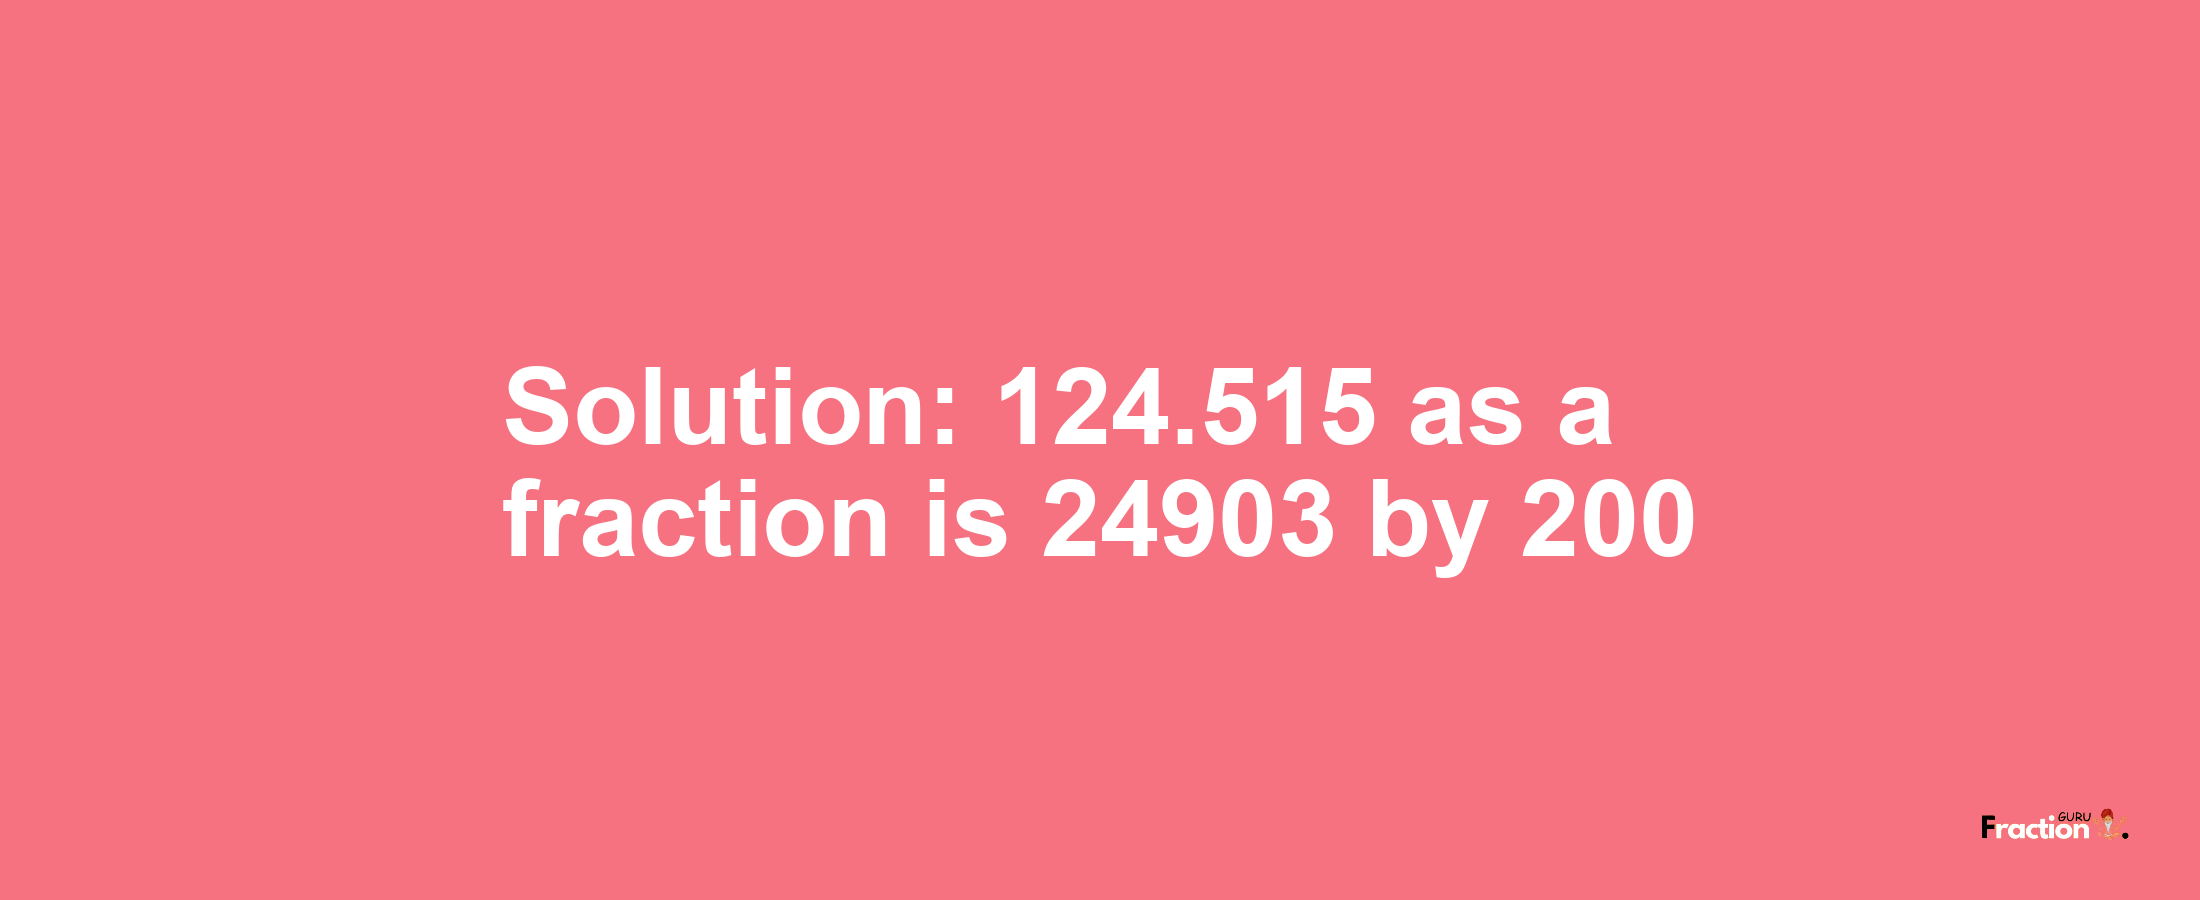 Solution:124.515 as a fraction is 24903/200